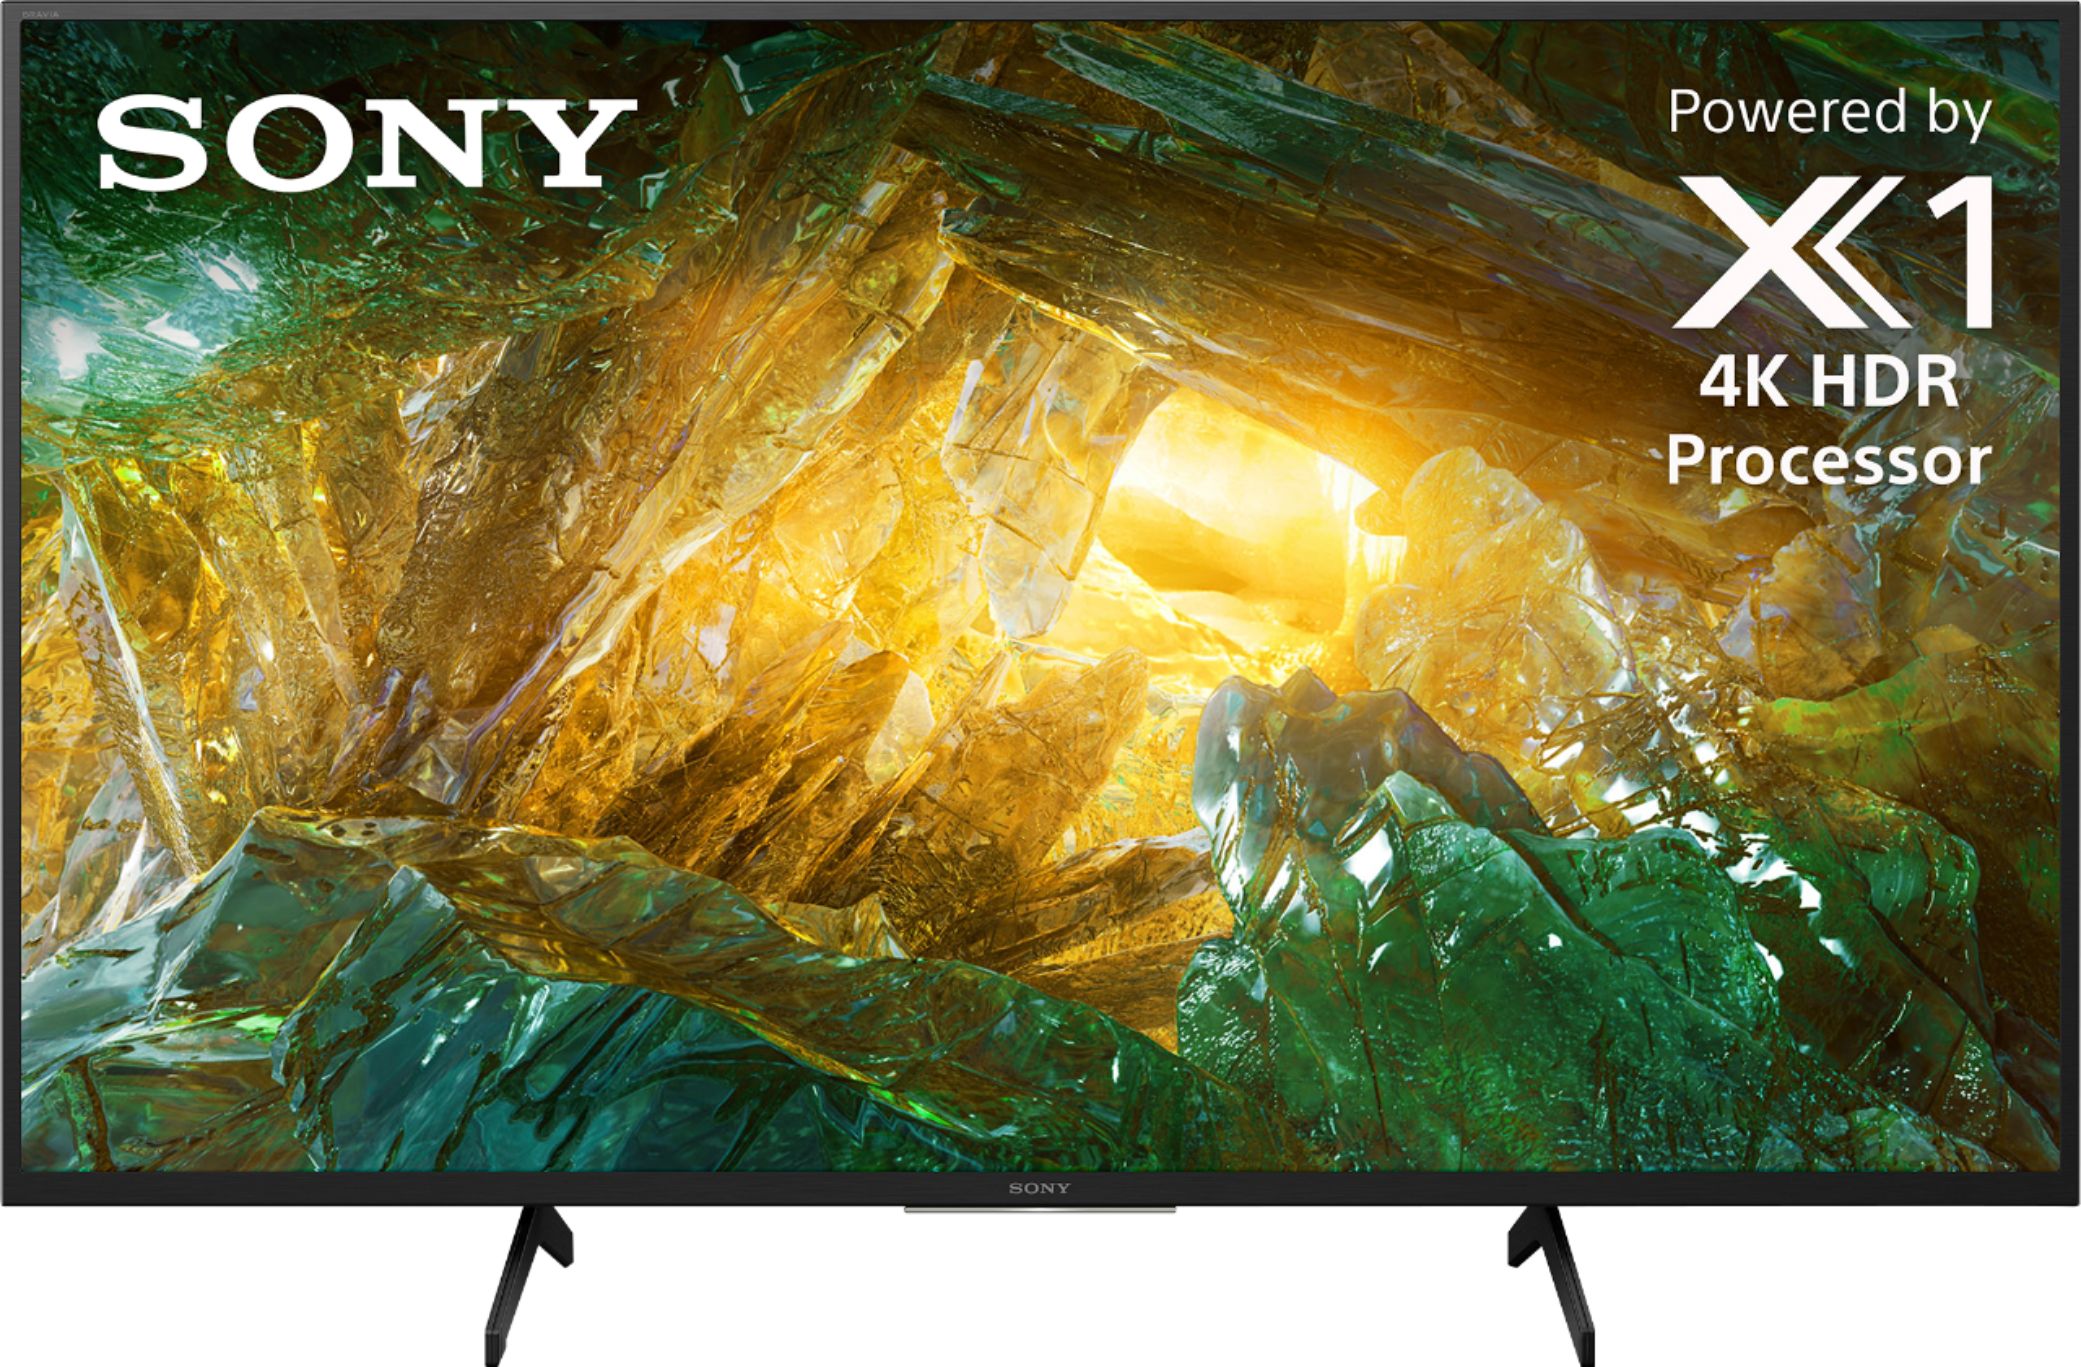 Sony - 43" Class - LED - X800H Series - Smart - 4K UHD TV with HDR